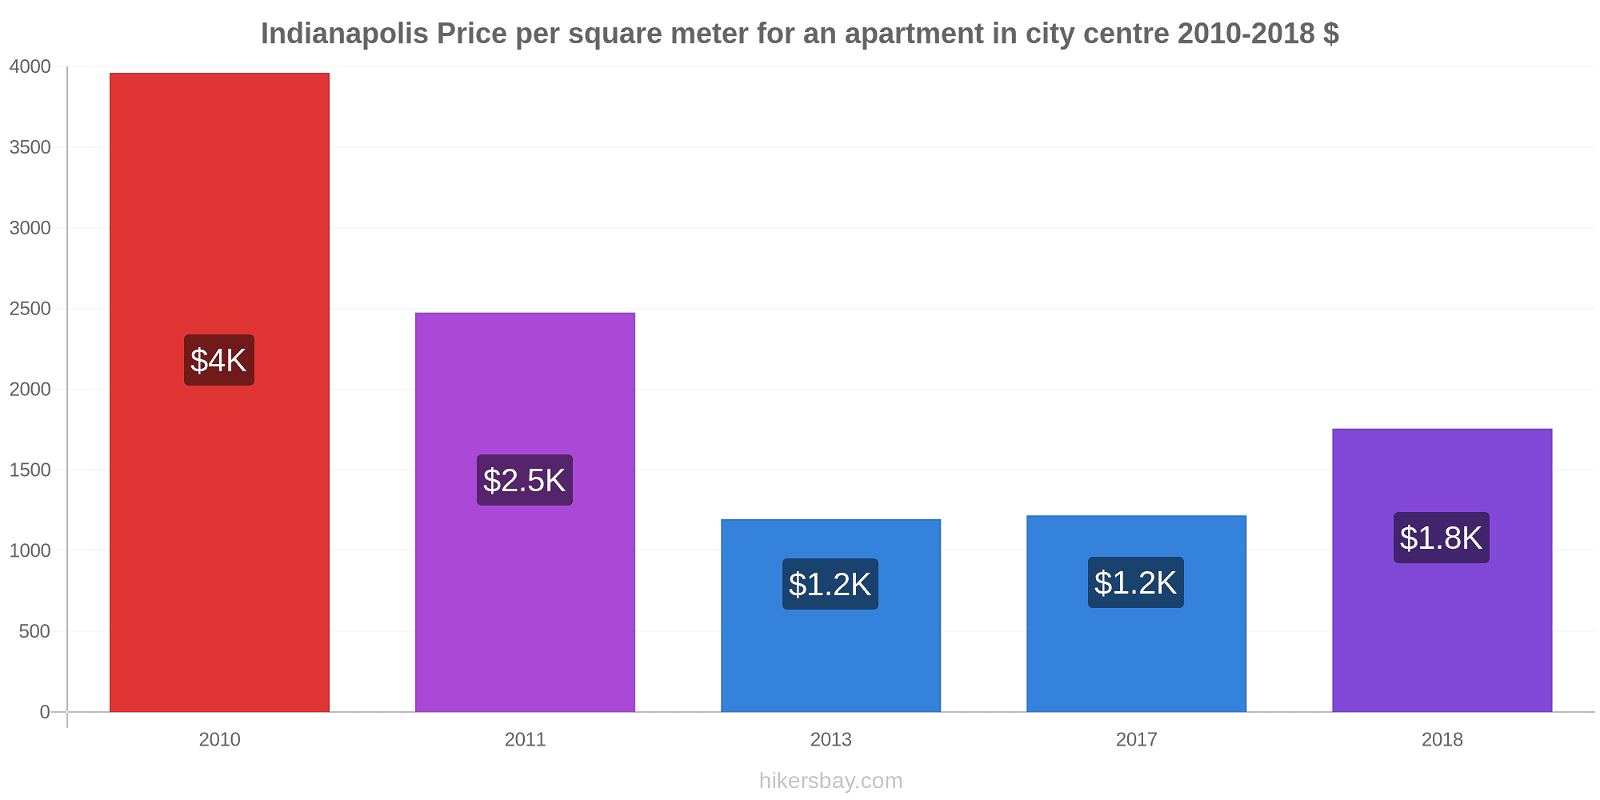 Indianapolis price changes Price per square meter for an apartment in city centre hikersbay.com